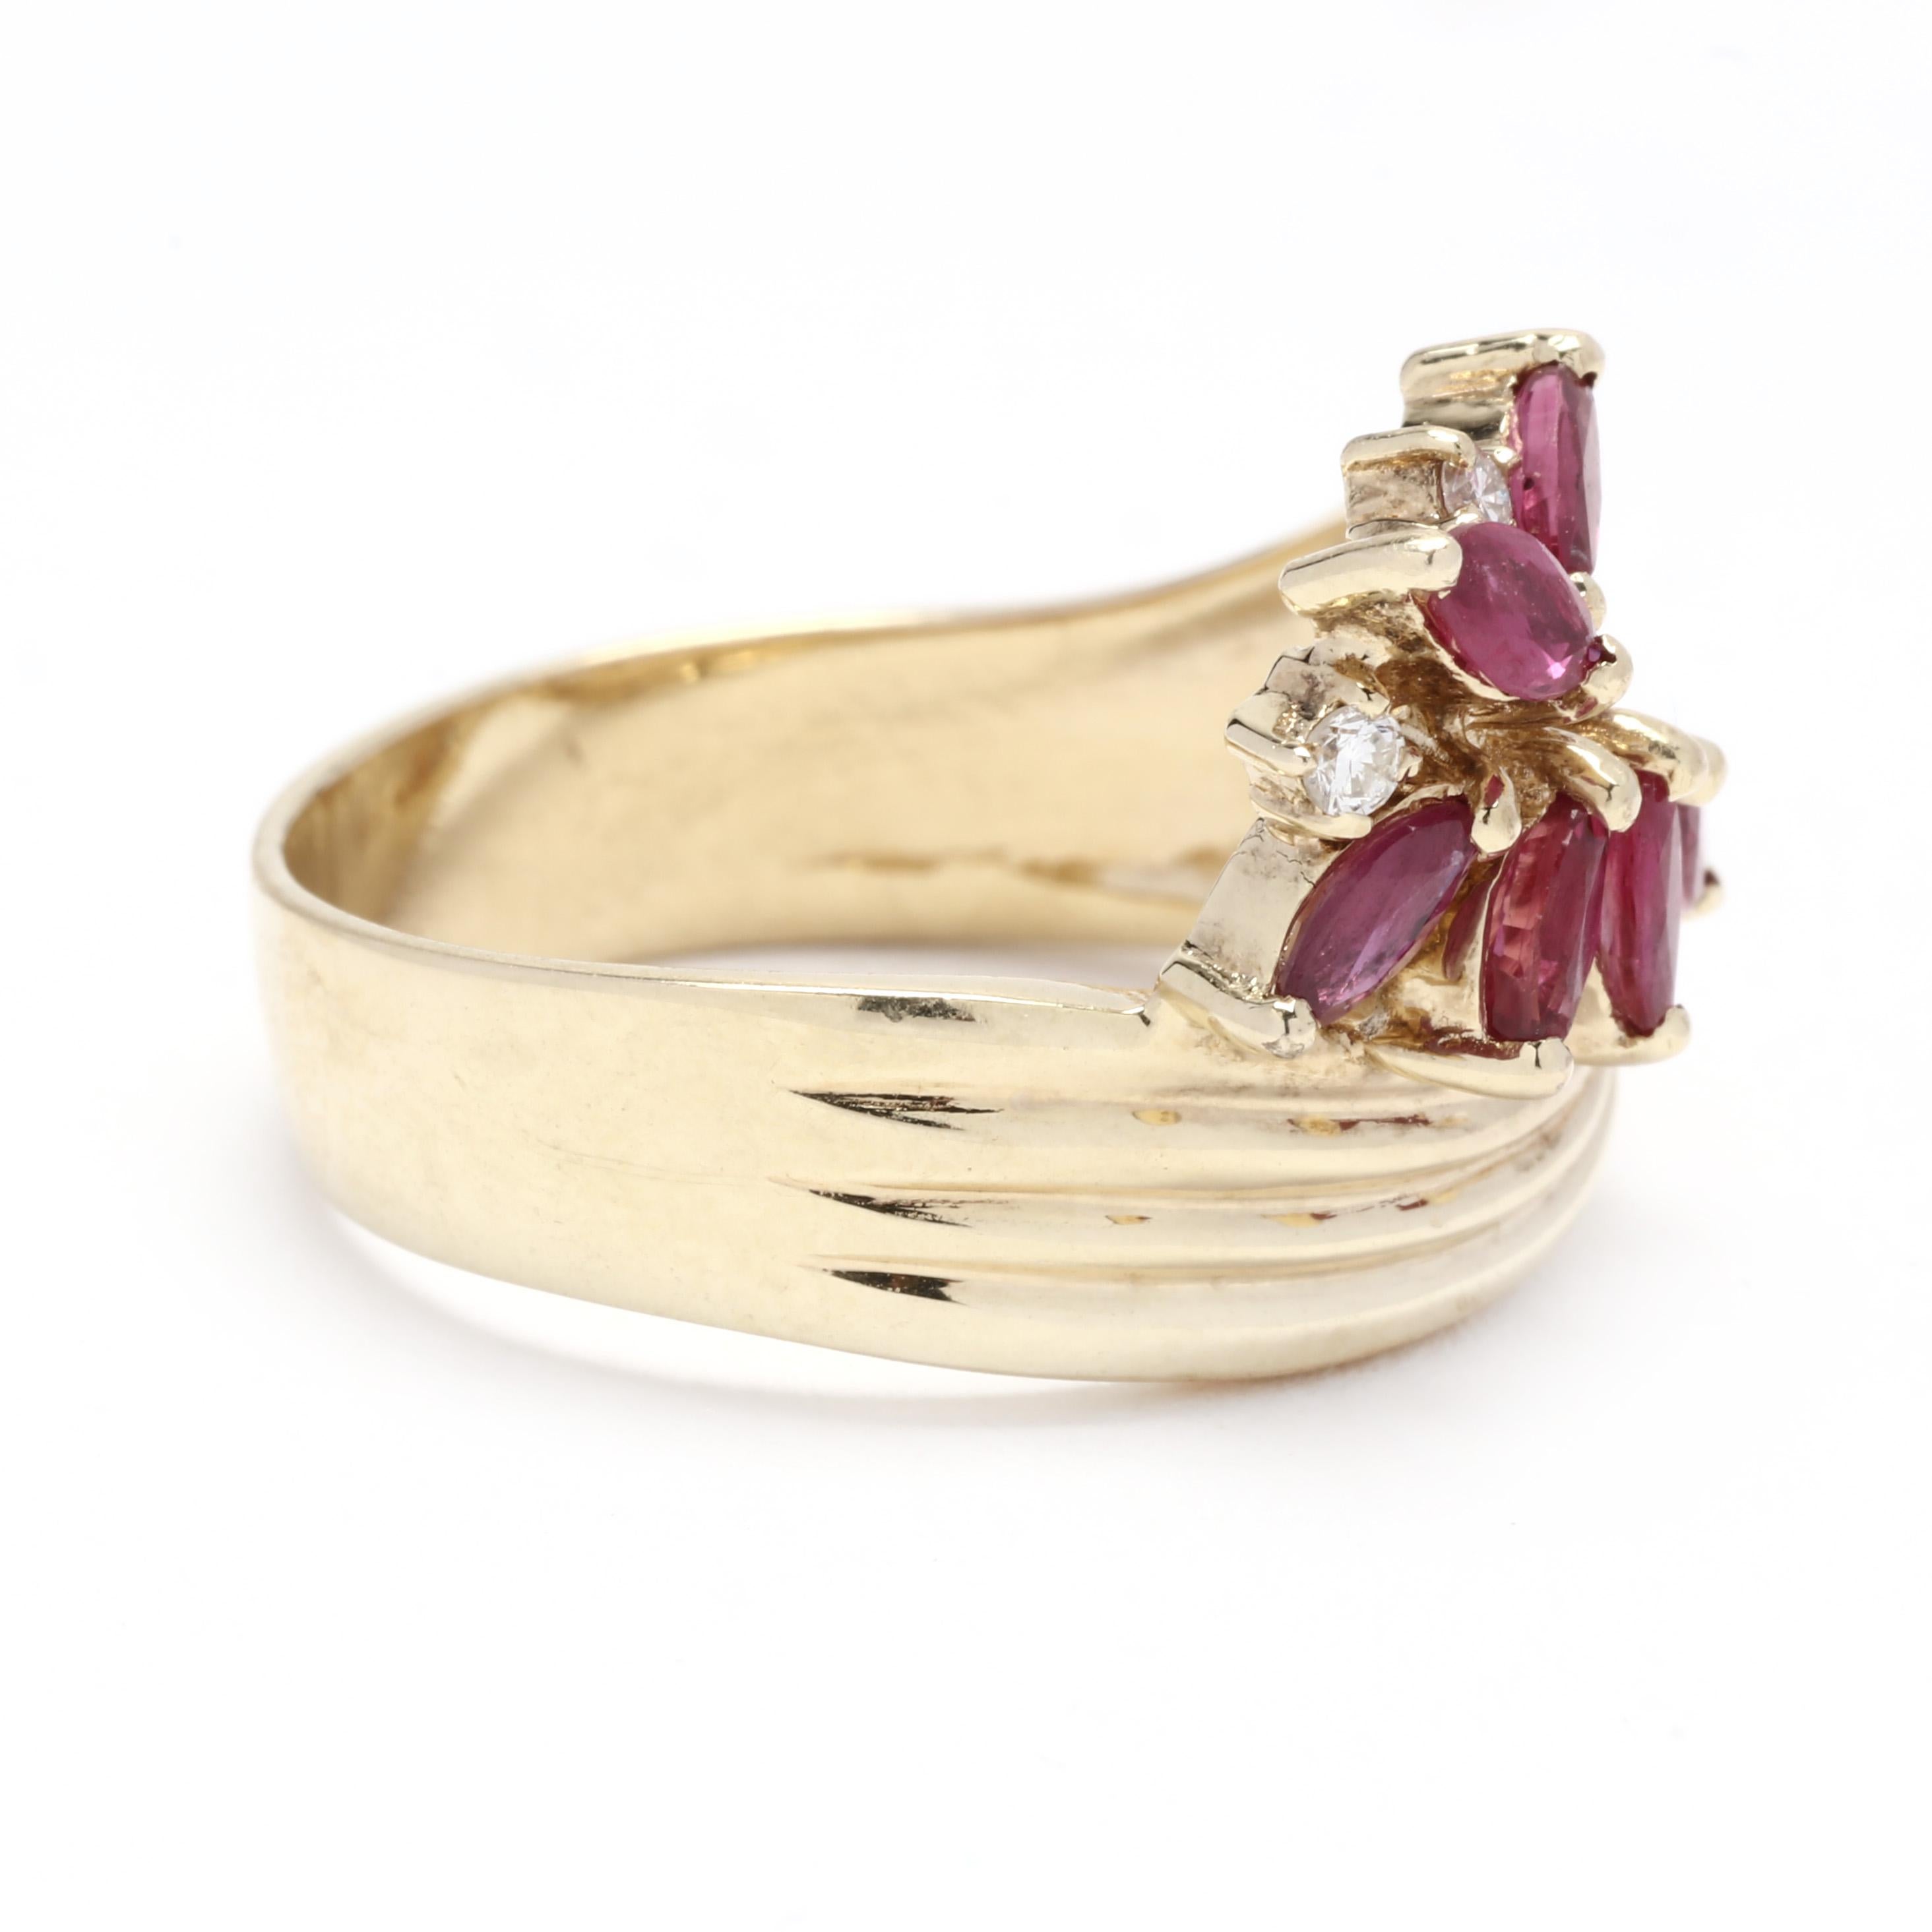 A vintage 14 karat yellow gold ruby and diamond cluster bypass ring. This July birthstone ring features a cluster of marquise cut rubies weighing approximately .75 total carats with round brilliant cut diamonds weighing approximately .05 total